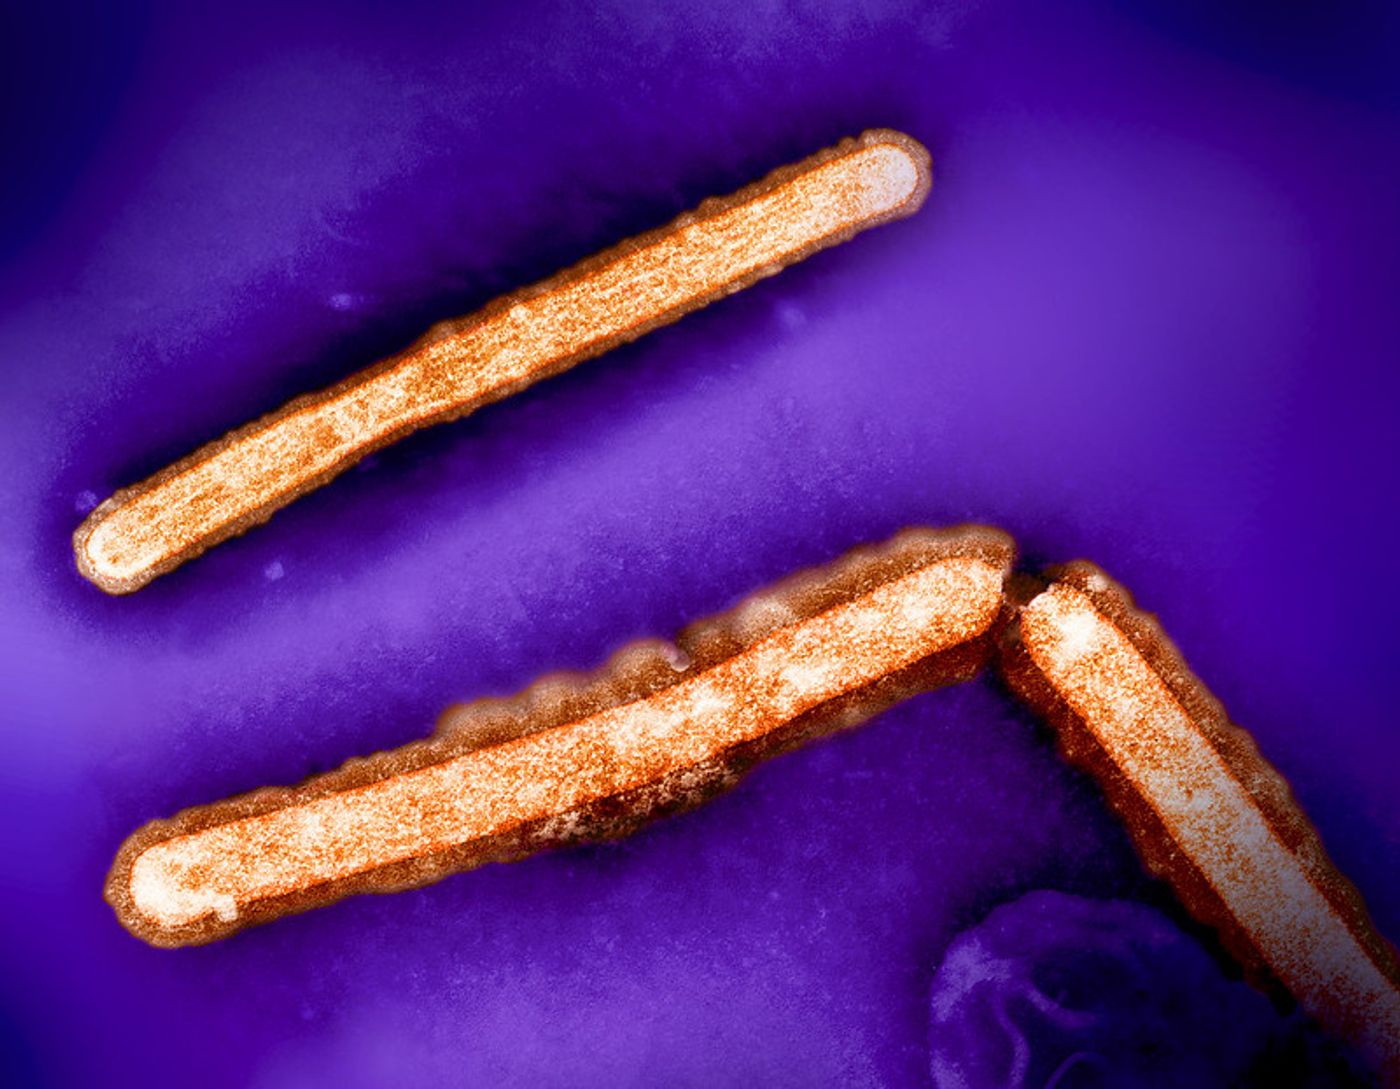 Three influenza A (H5N1/bird flu) virus particles (rod-shaped; orange). Note: Layout incorporates two CDC transmission electron micrographs that have been repositioned and colorized by NIAID. Scale has been modified. Credit: CDC and NIAID